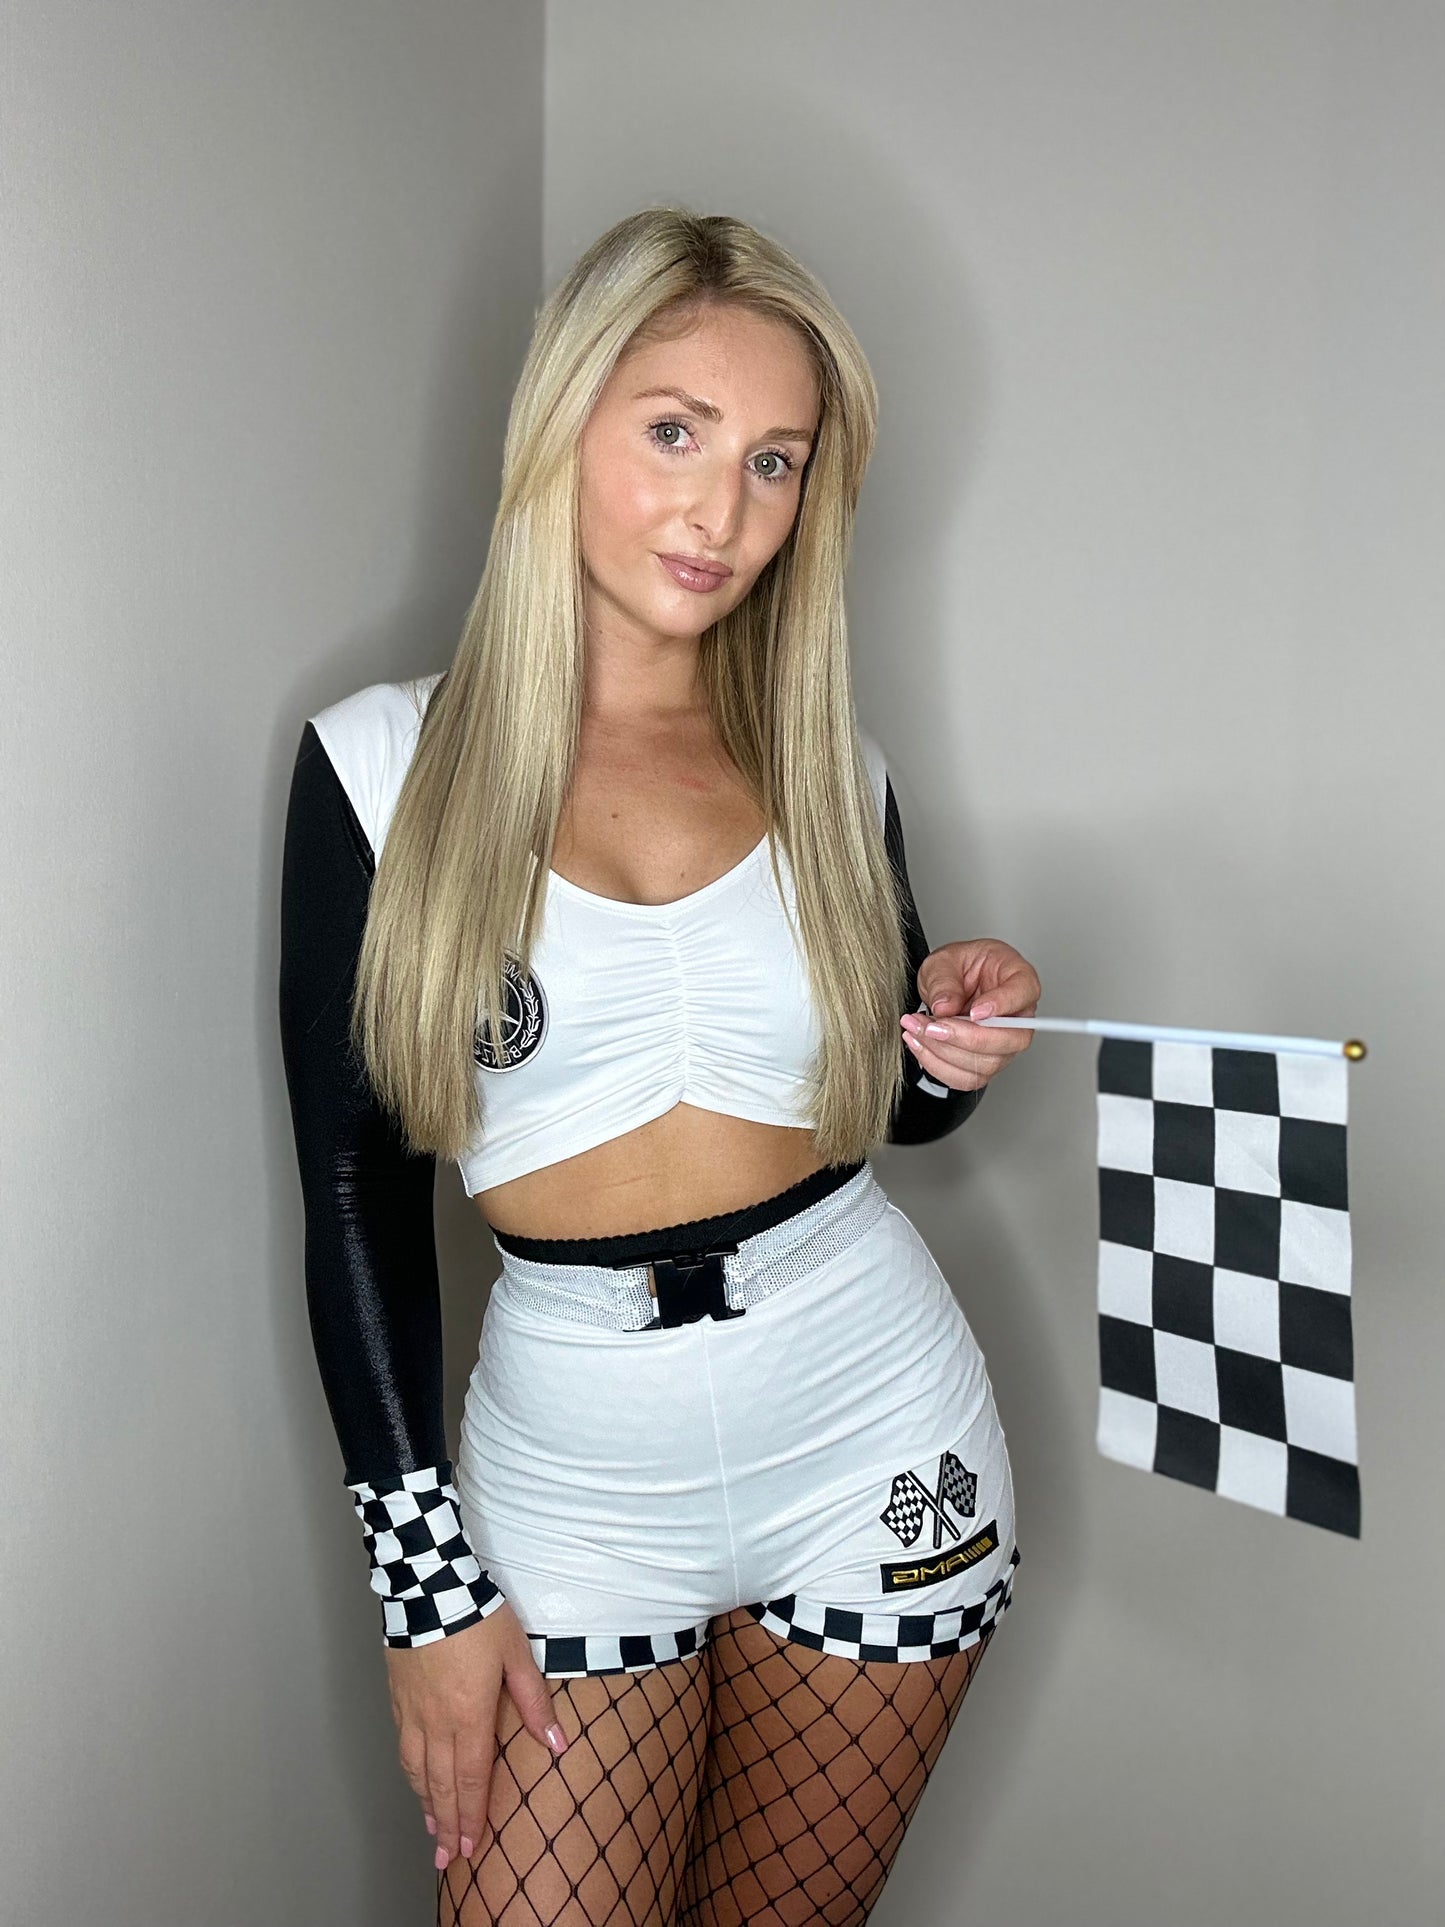 The racer girl no.2 full outfit